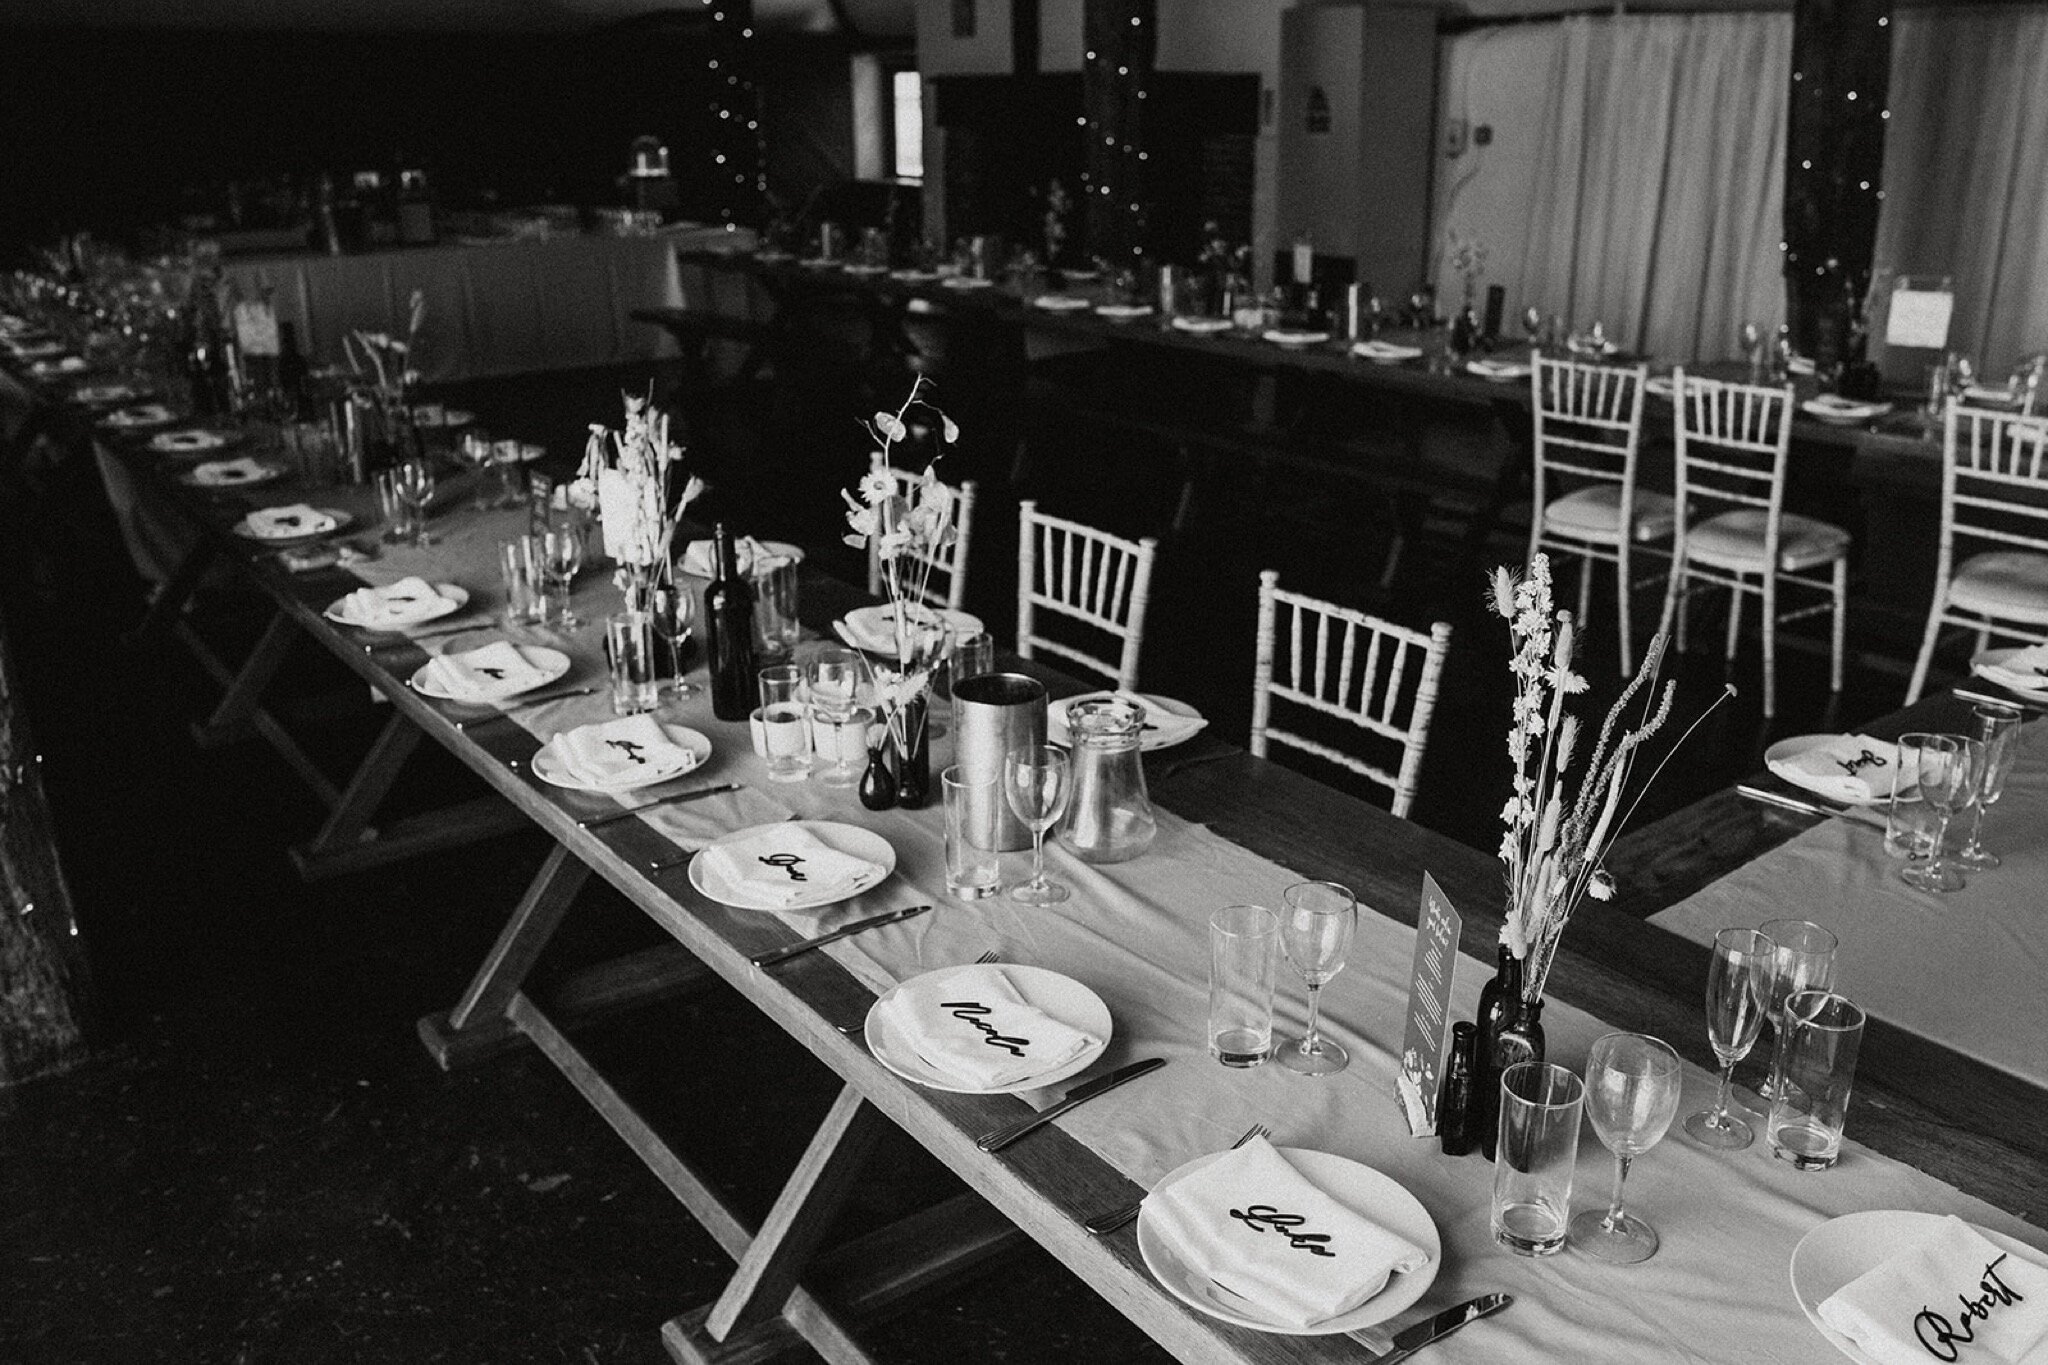 29_V+D Wedding-430_black and white photo of wedding breakfast table and place names with dried flowers%0A.jpg